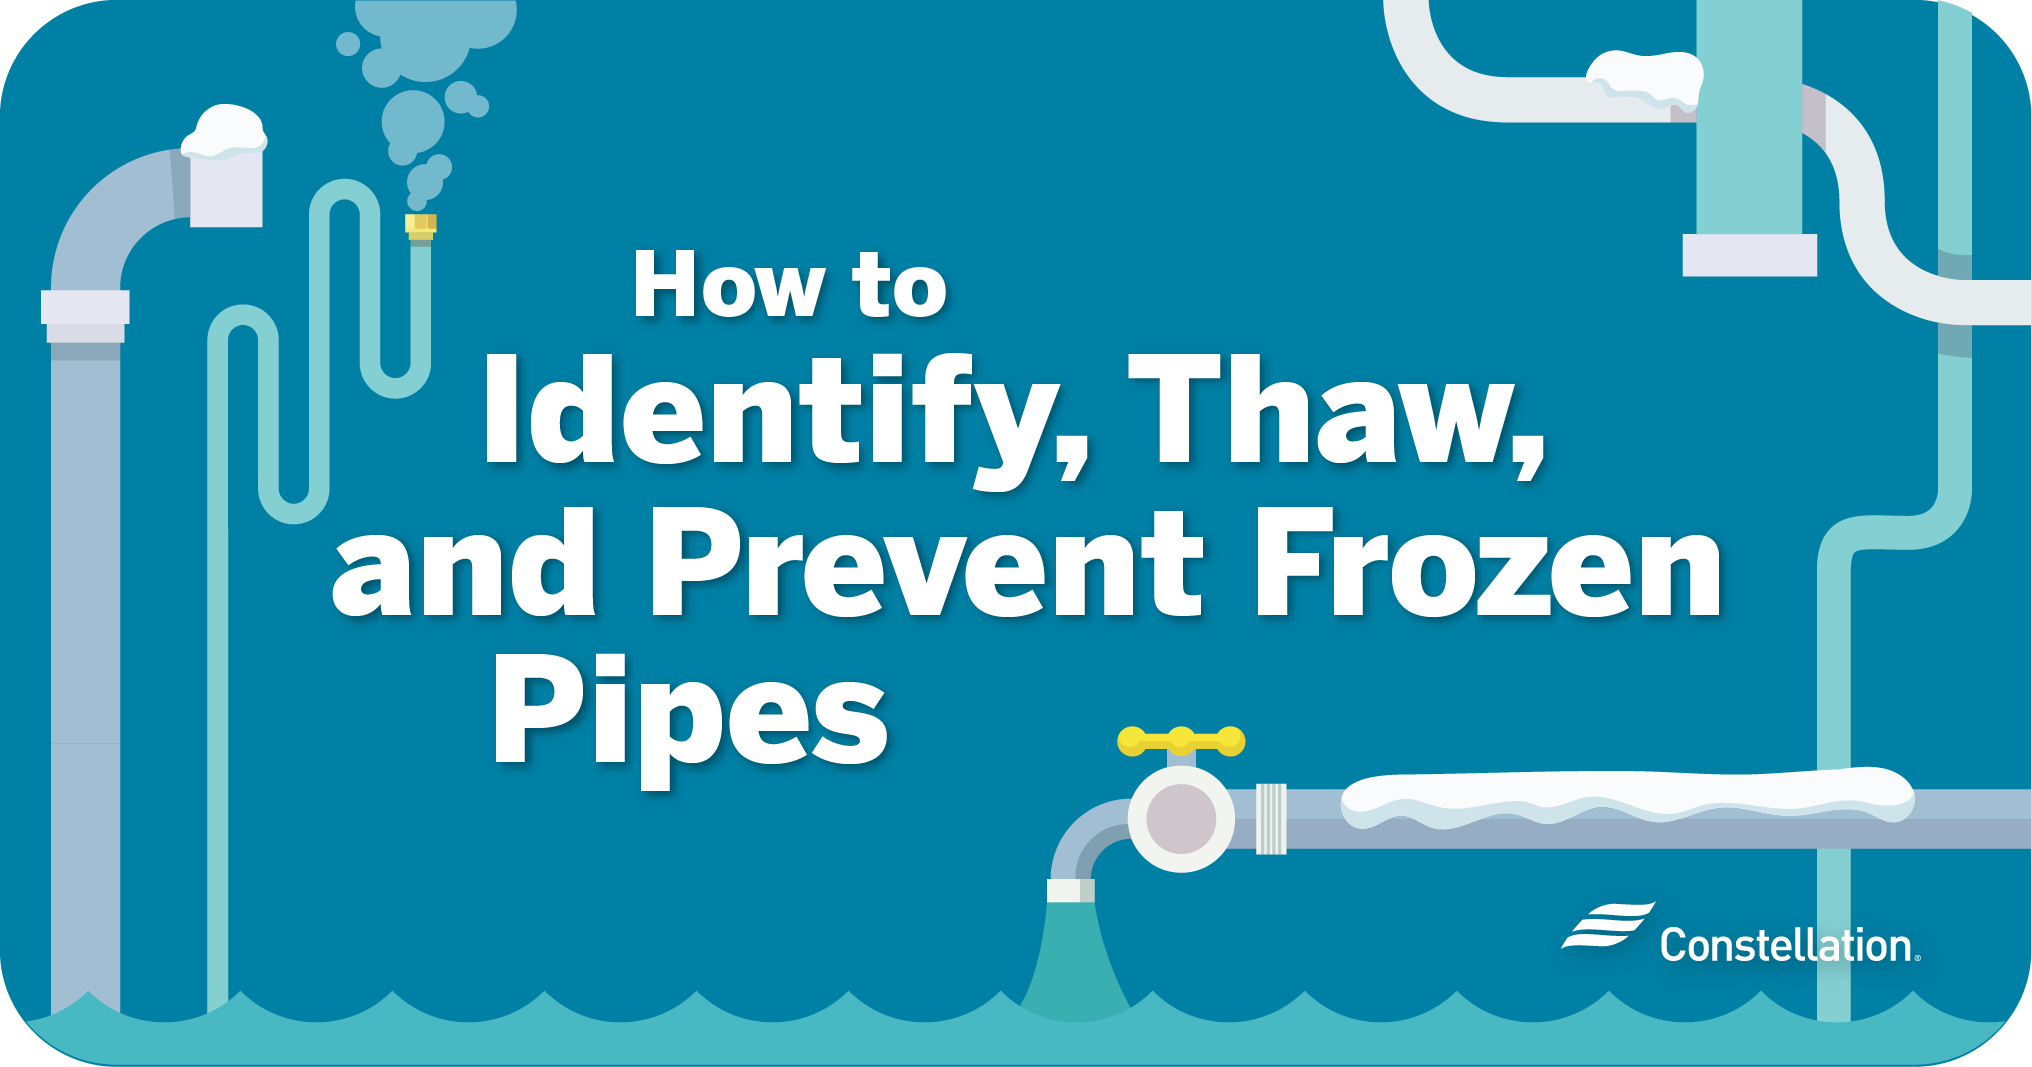 What to do if pipes freeze.